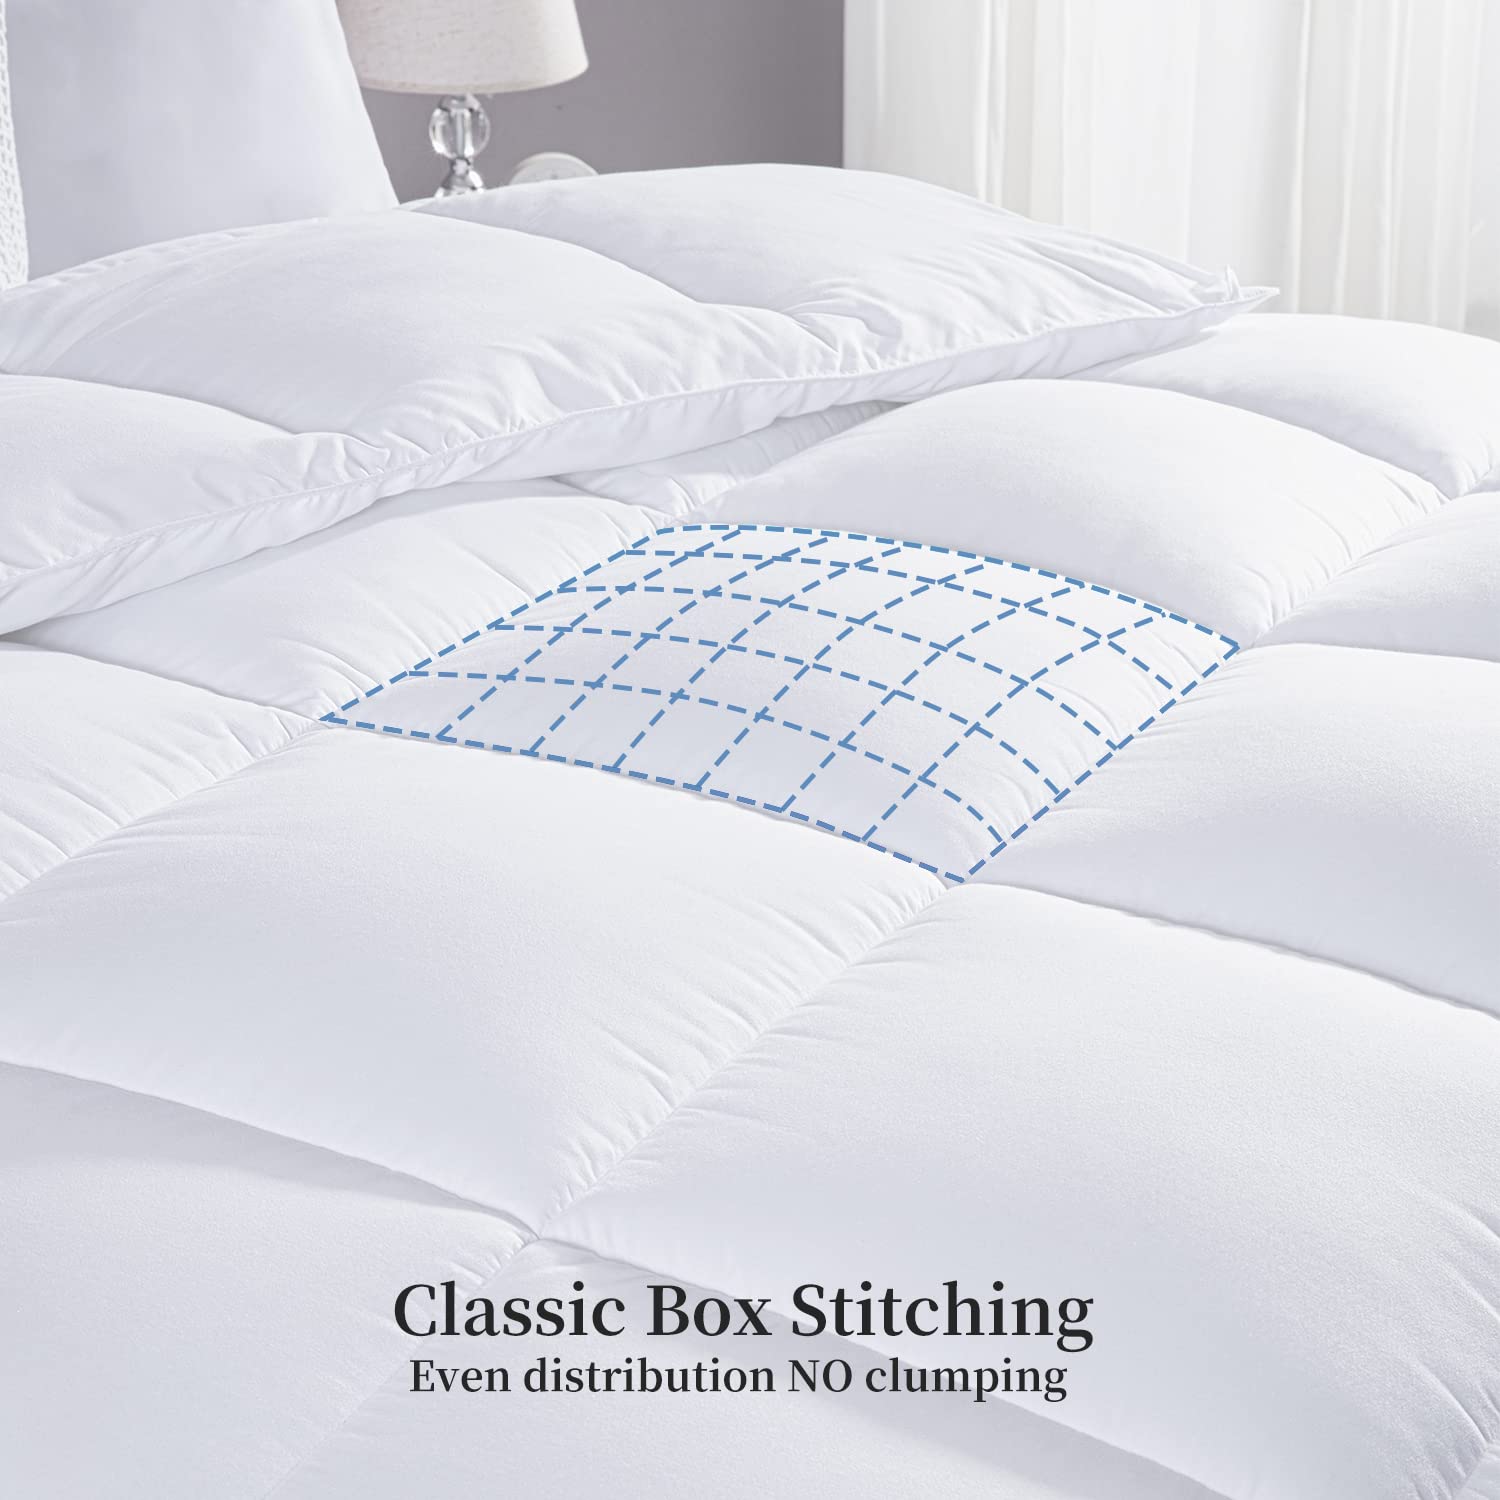 Kingsley trend Queen Comforter Duvet Insert - All Season Quilted Ultra Soft Breathable Down Alternative, Box Stitch White Comforter with Corner Tabs, 90x90